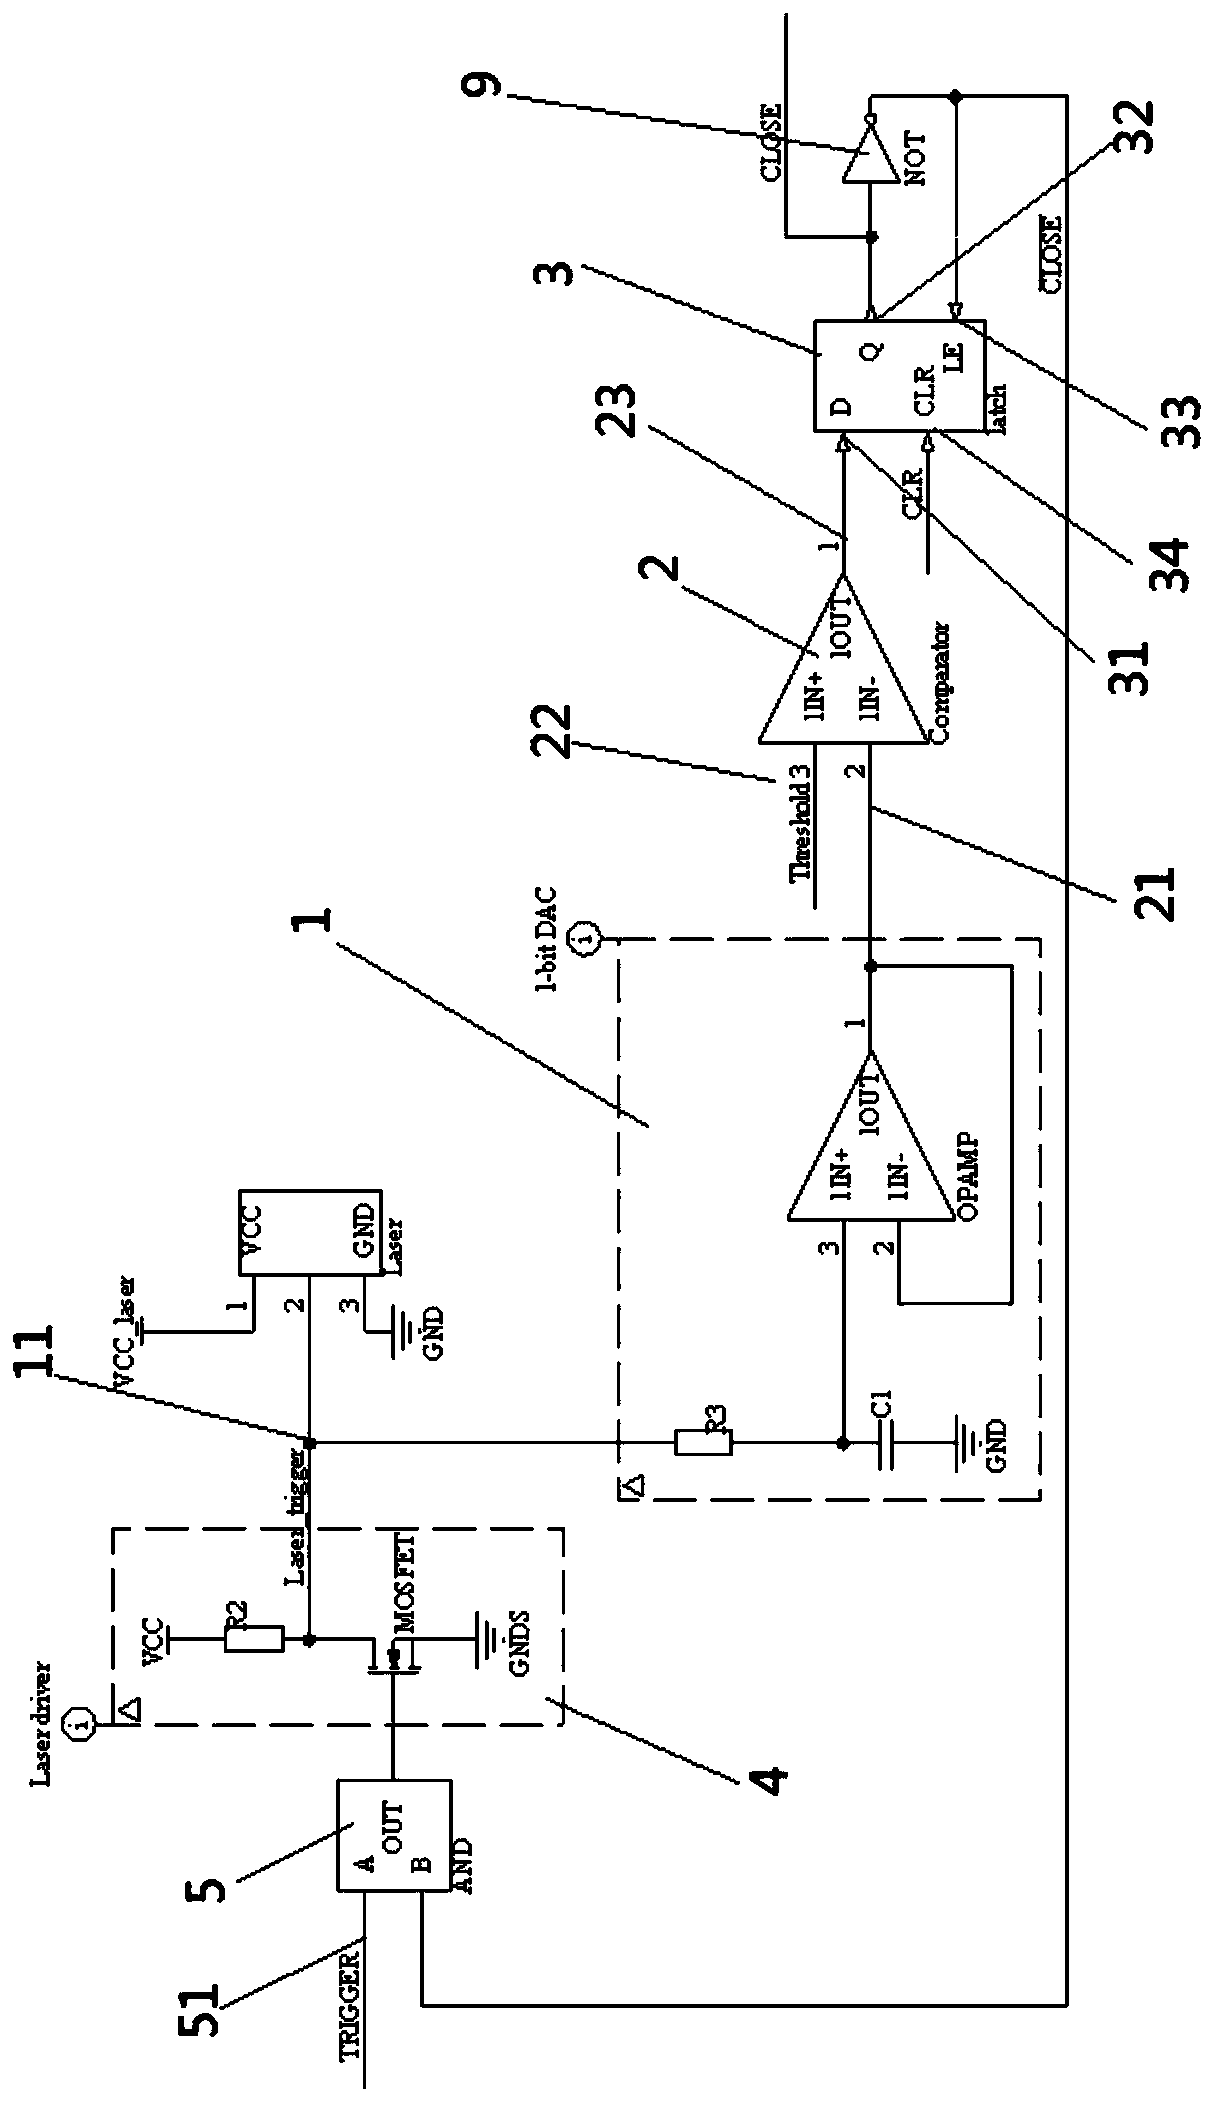 Human eye protection circuit capable of being applied to light detecting and ranging system